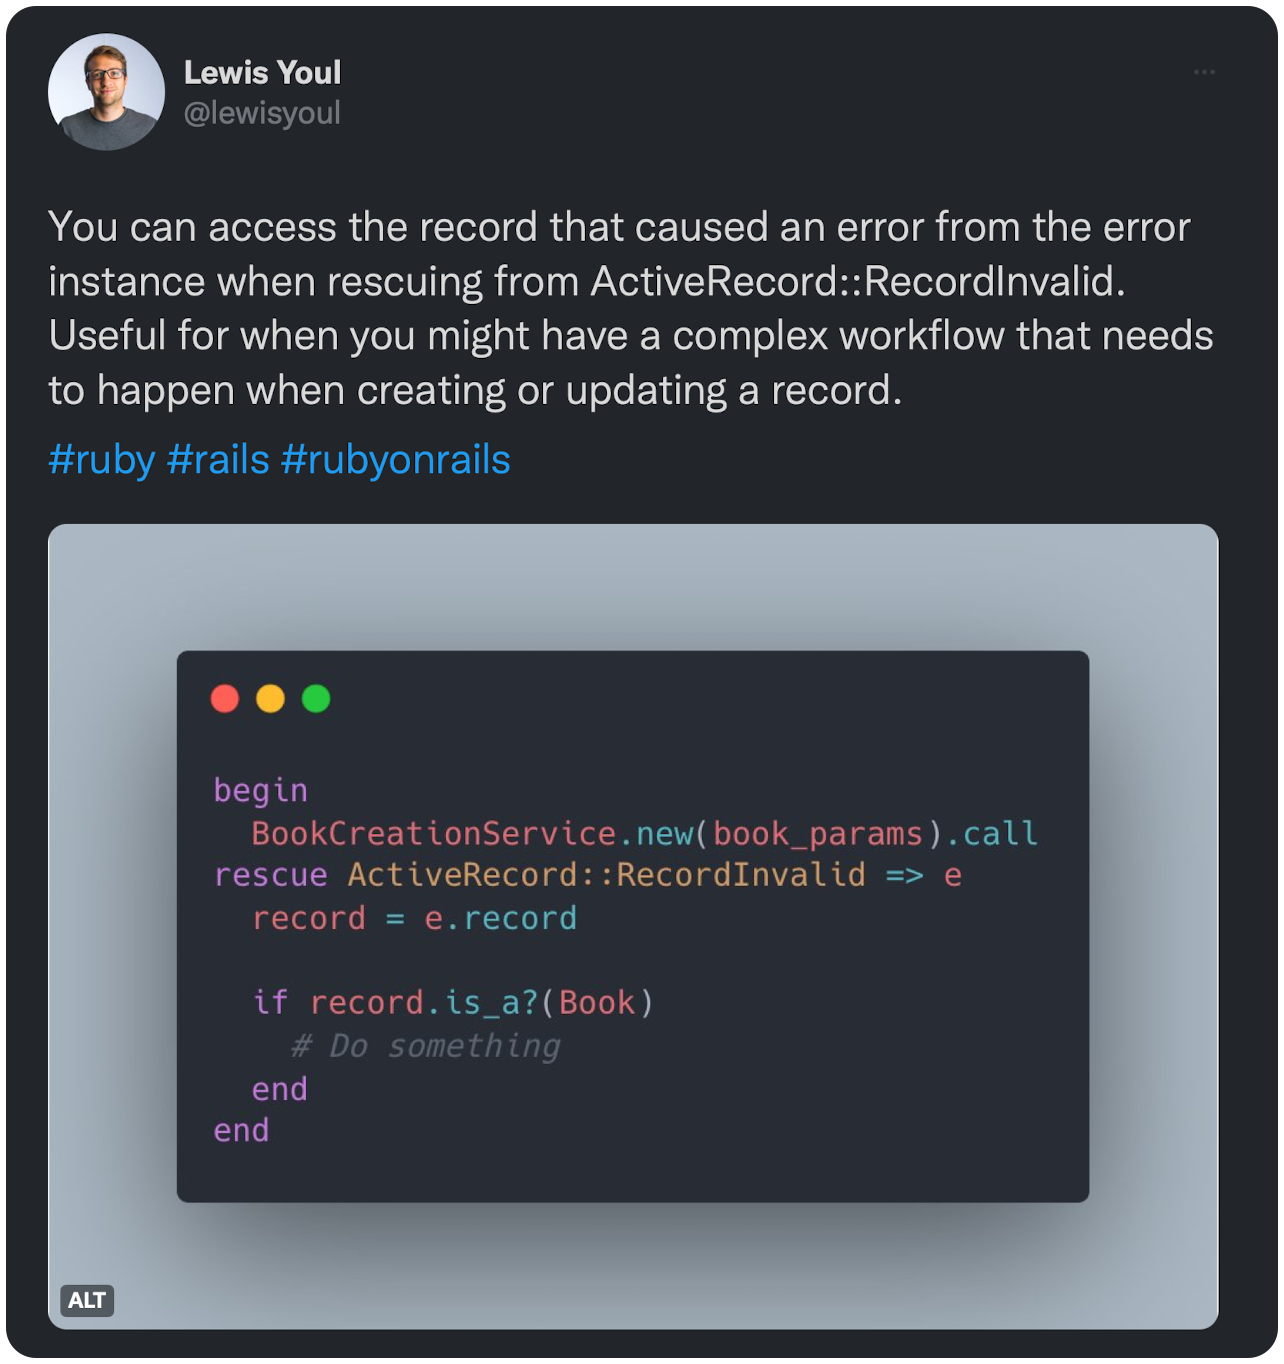 ou can access the record that caused an error from the error instance when rescuing from ActiveRecord::RecordInvalid. Useful for when you might have a complex workflow that needs to happen when creating or updating a record. #ruby #rails #rubyonrails